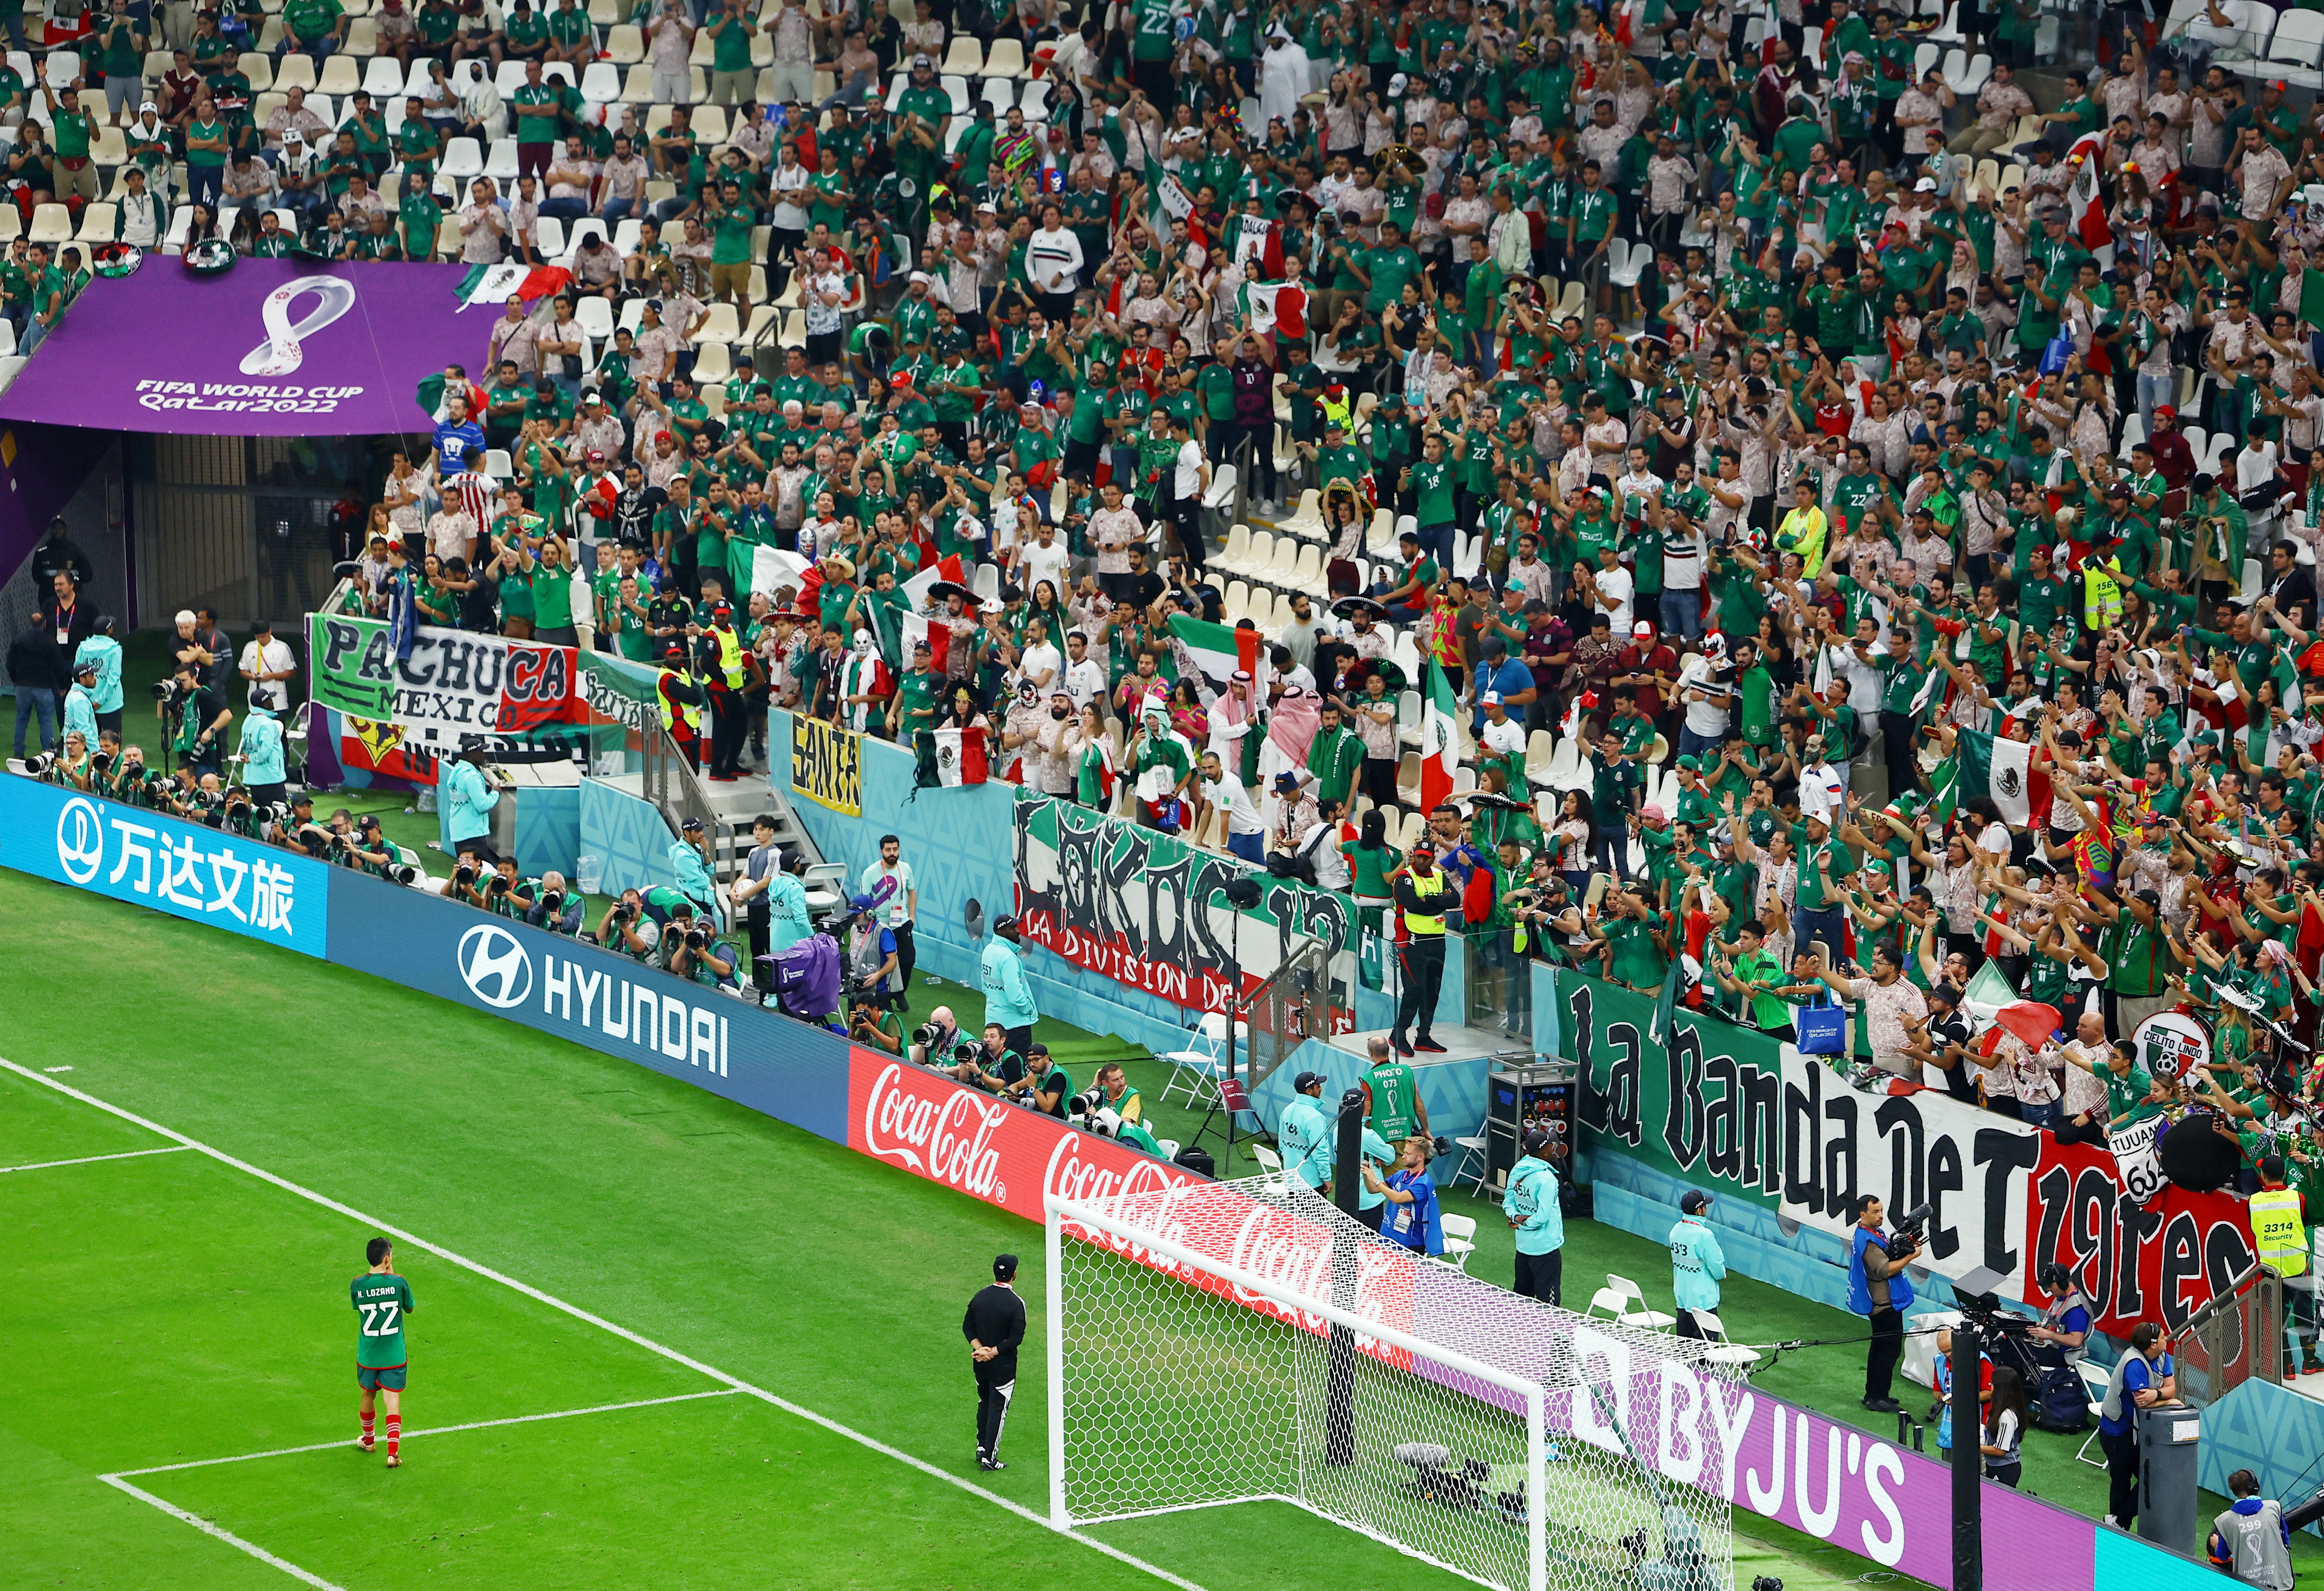 Soccer Football - FIFA World Cup Qatar 2022 - Group C - Saudi Arabia v Mexico - Lusail Stadium, Lusail, Qatar - December 1, 2022 Mexico's Hirving Lozano applauds fans after the match as Mexico are eliminated from the World Cup REUTERS/Molly Darlington